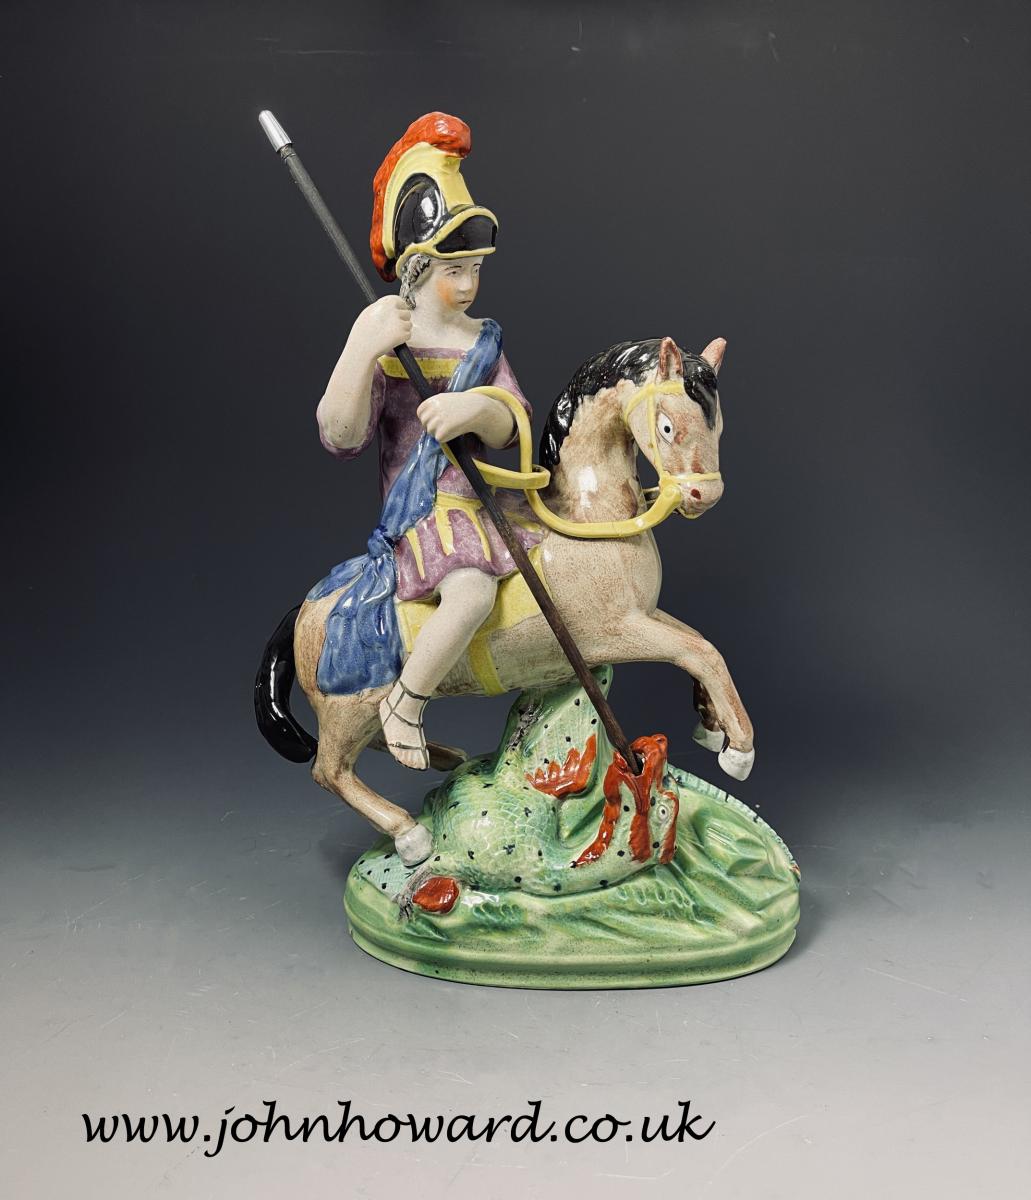 Staffordshire Pottery pearlware figure of St George and the Dragon circa 1820 England